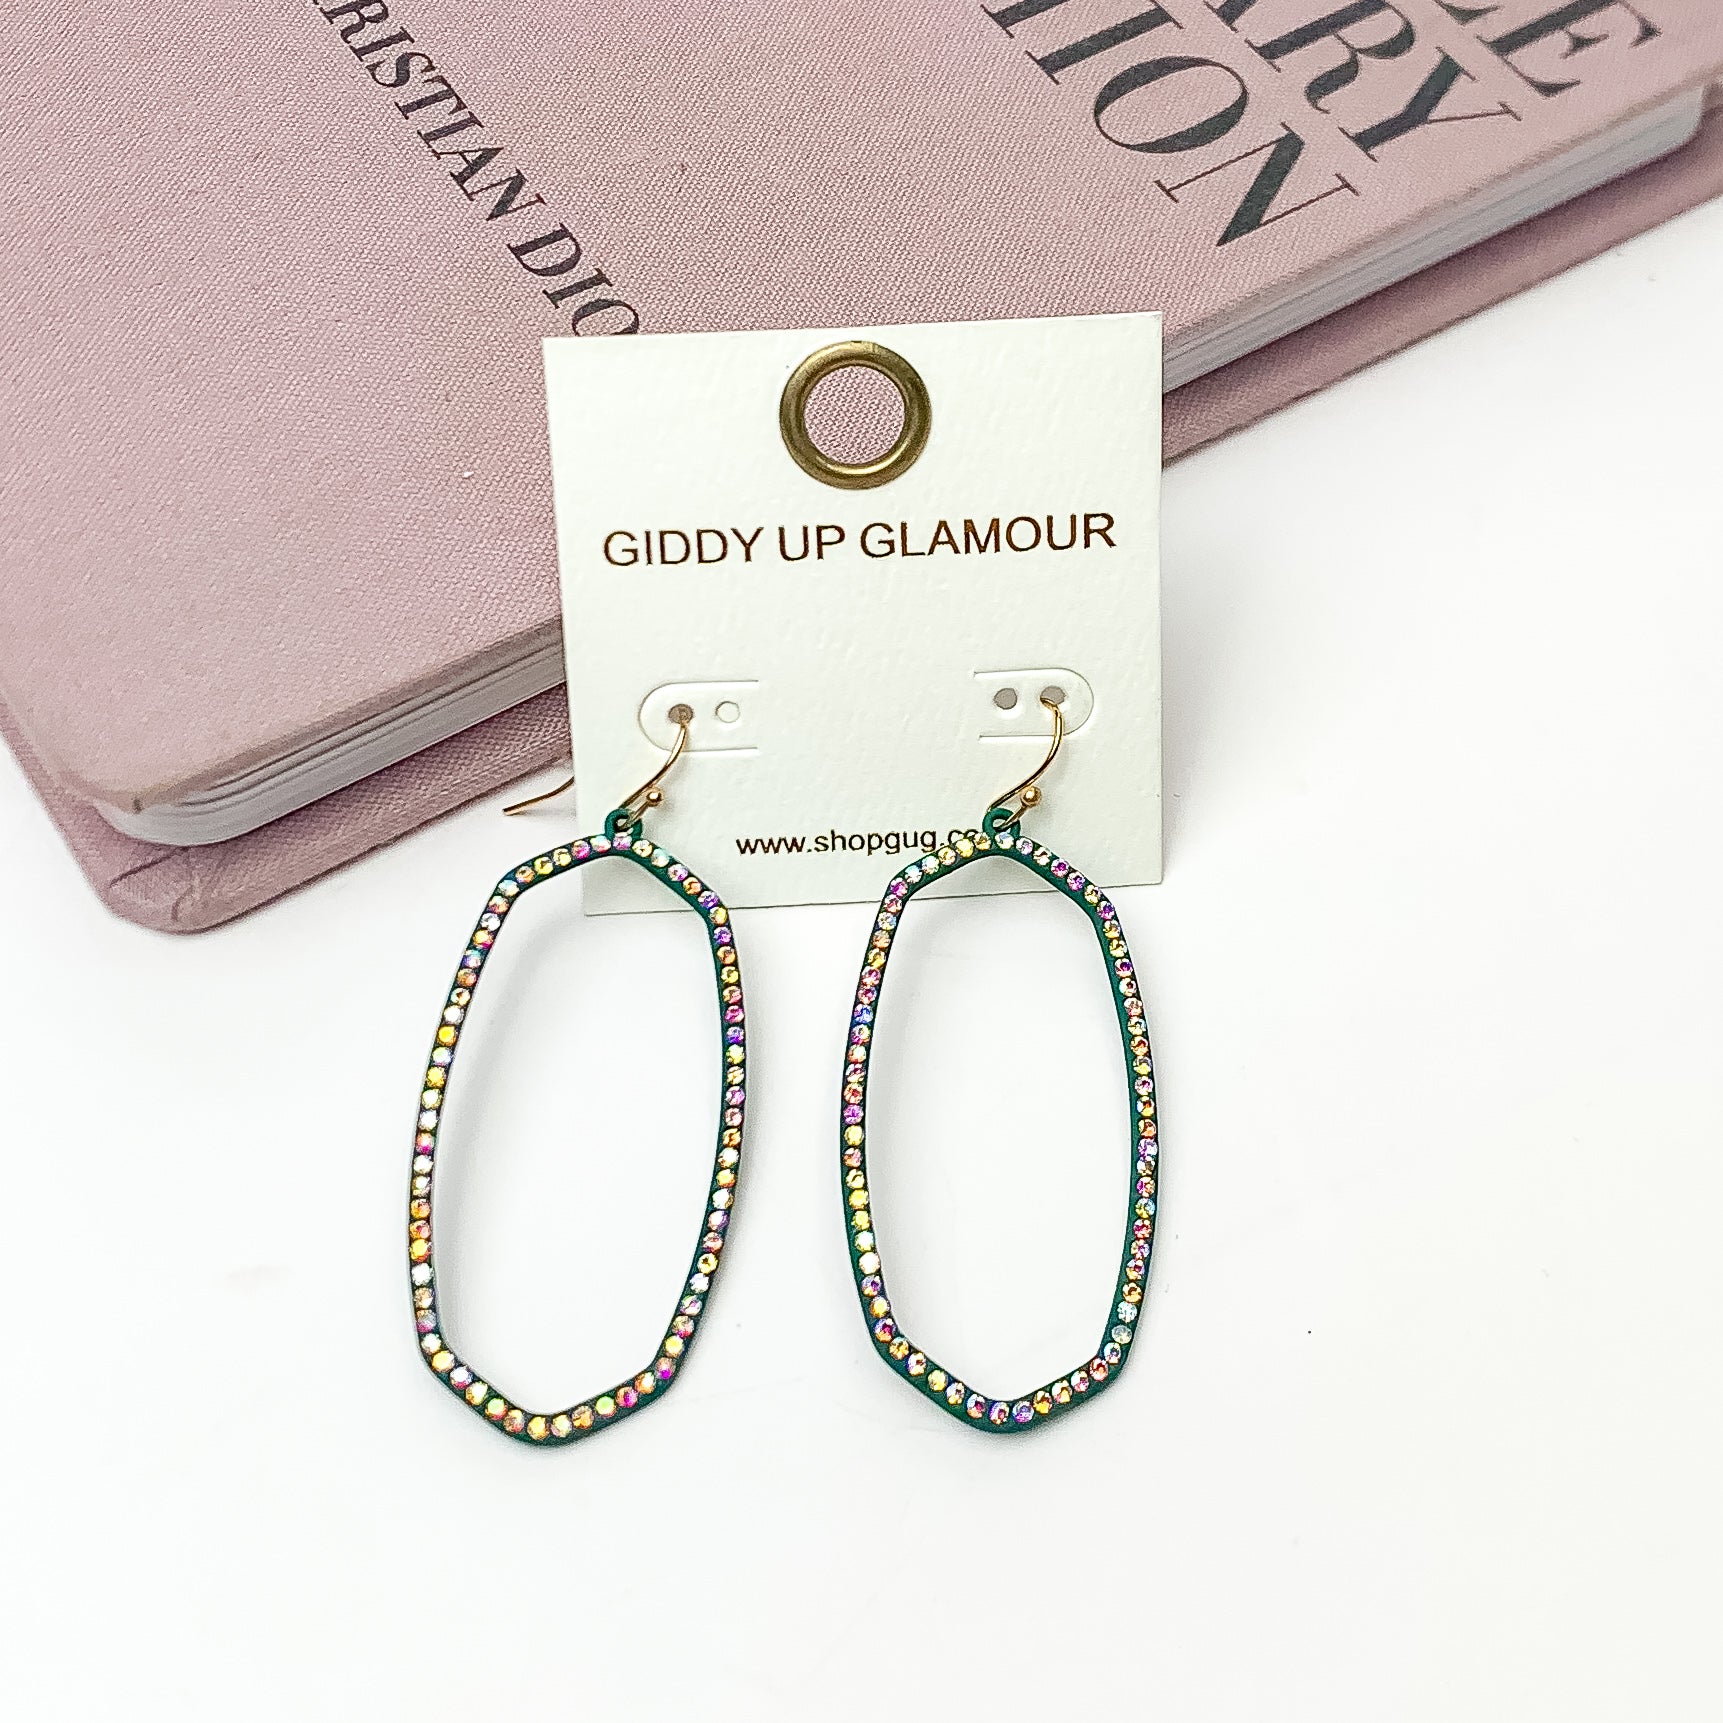 Sparkle Girl Open Oval Earrings in Dark Green. These earrings are pictured laying against a pink book with a white background.